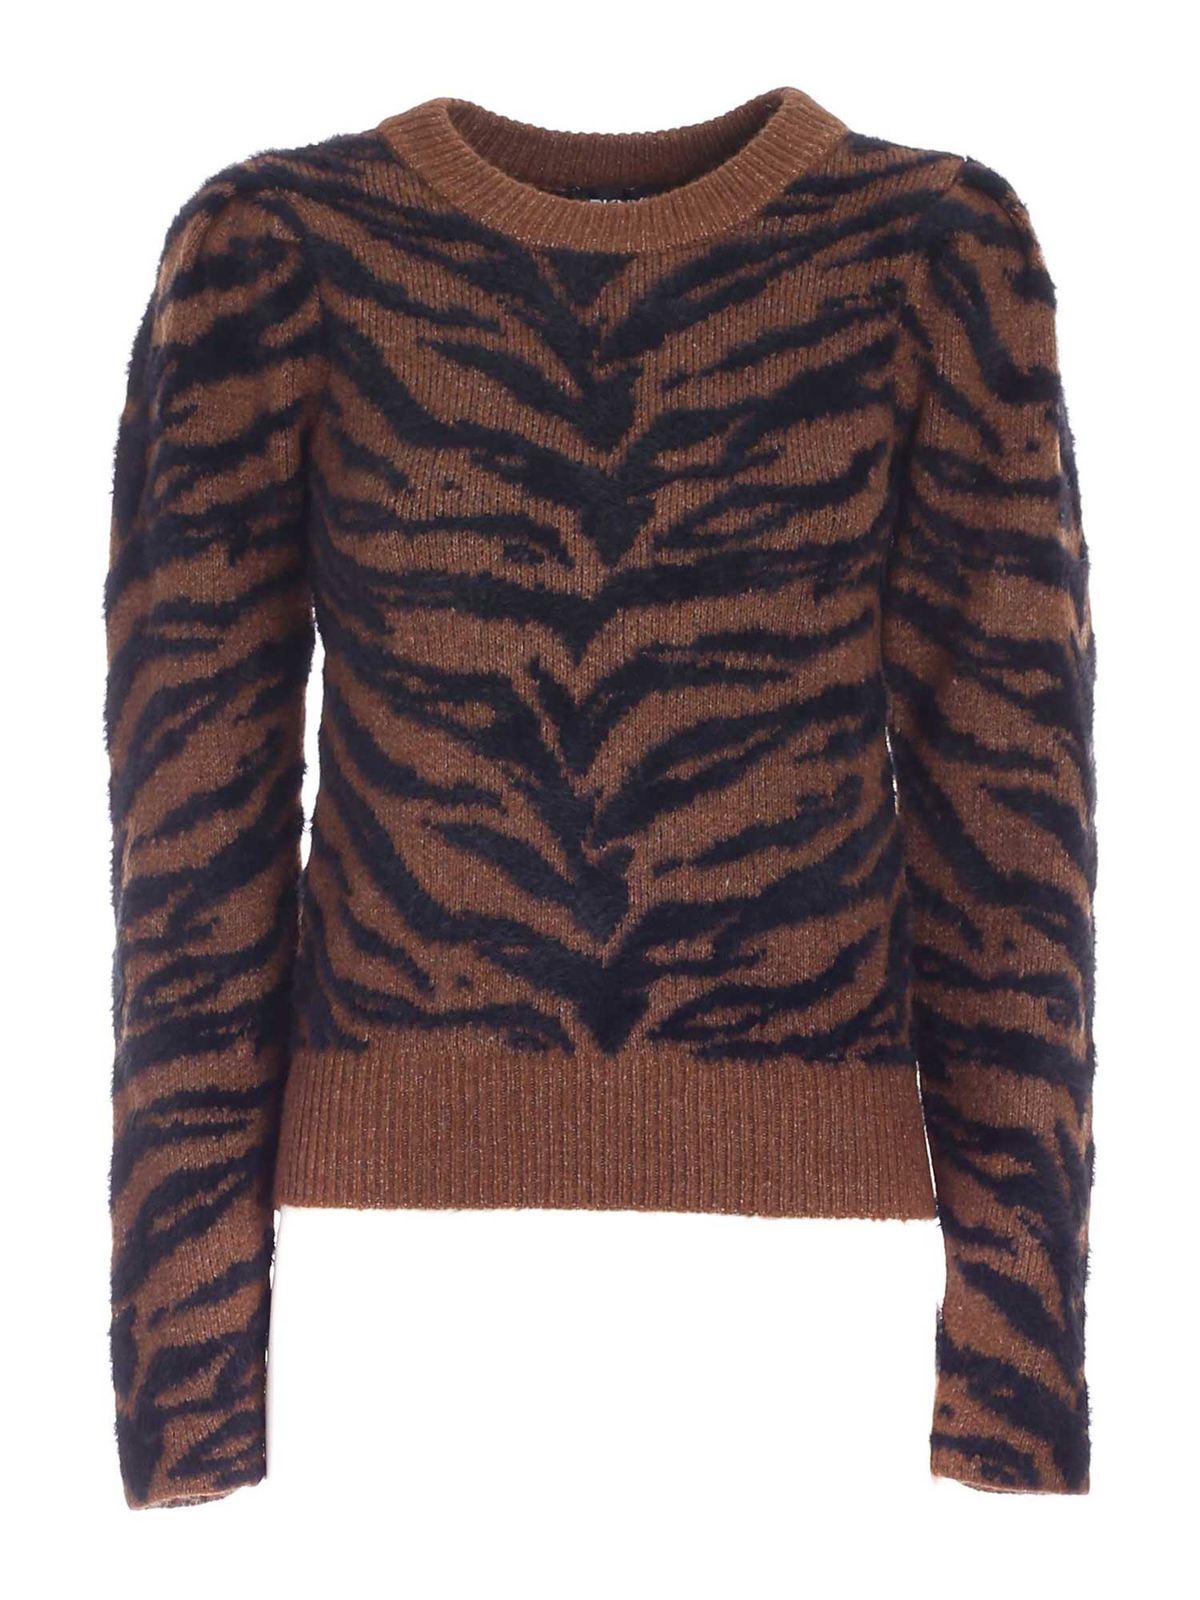 Dkny Striped Sweater In Brown And Black In Animal Print